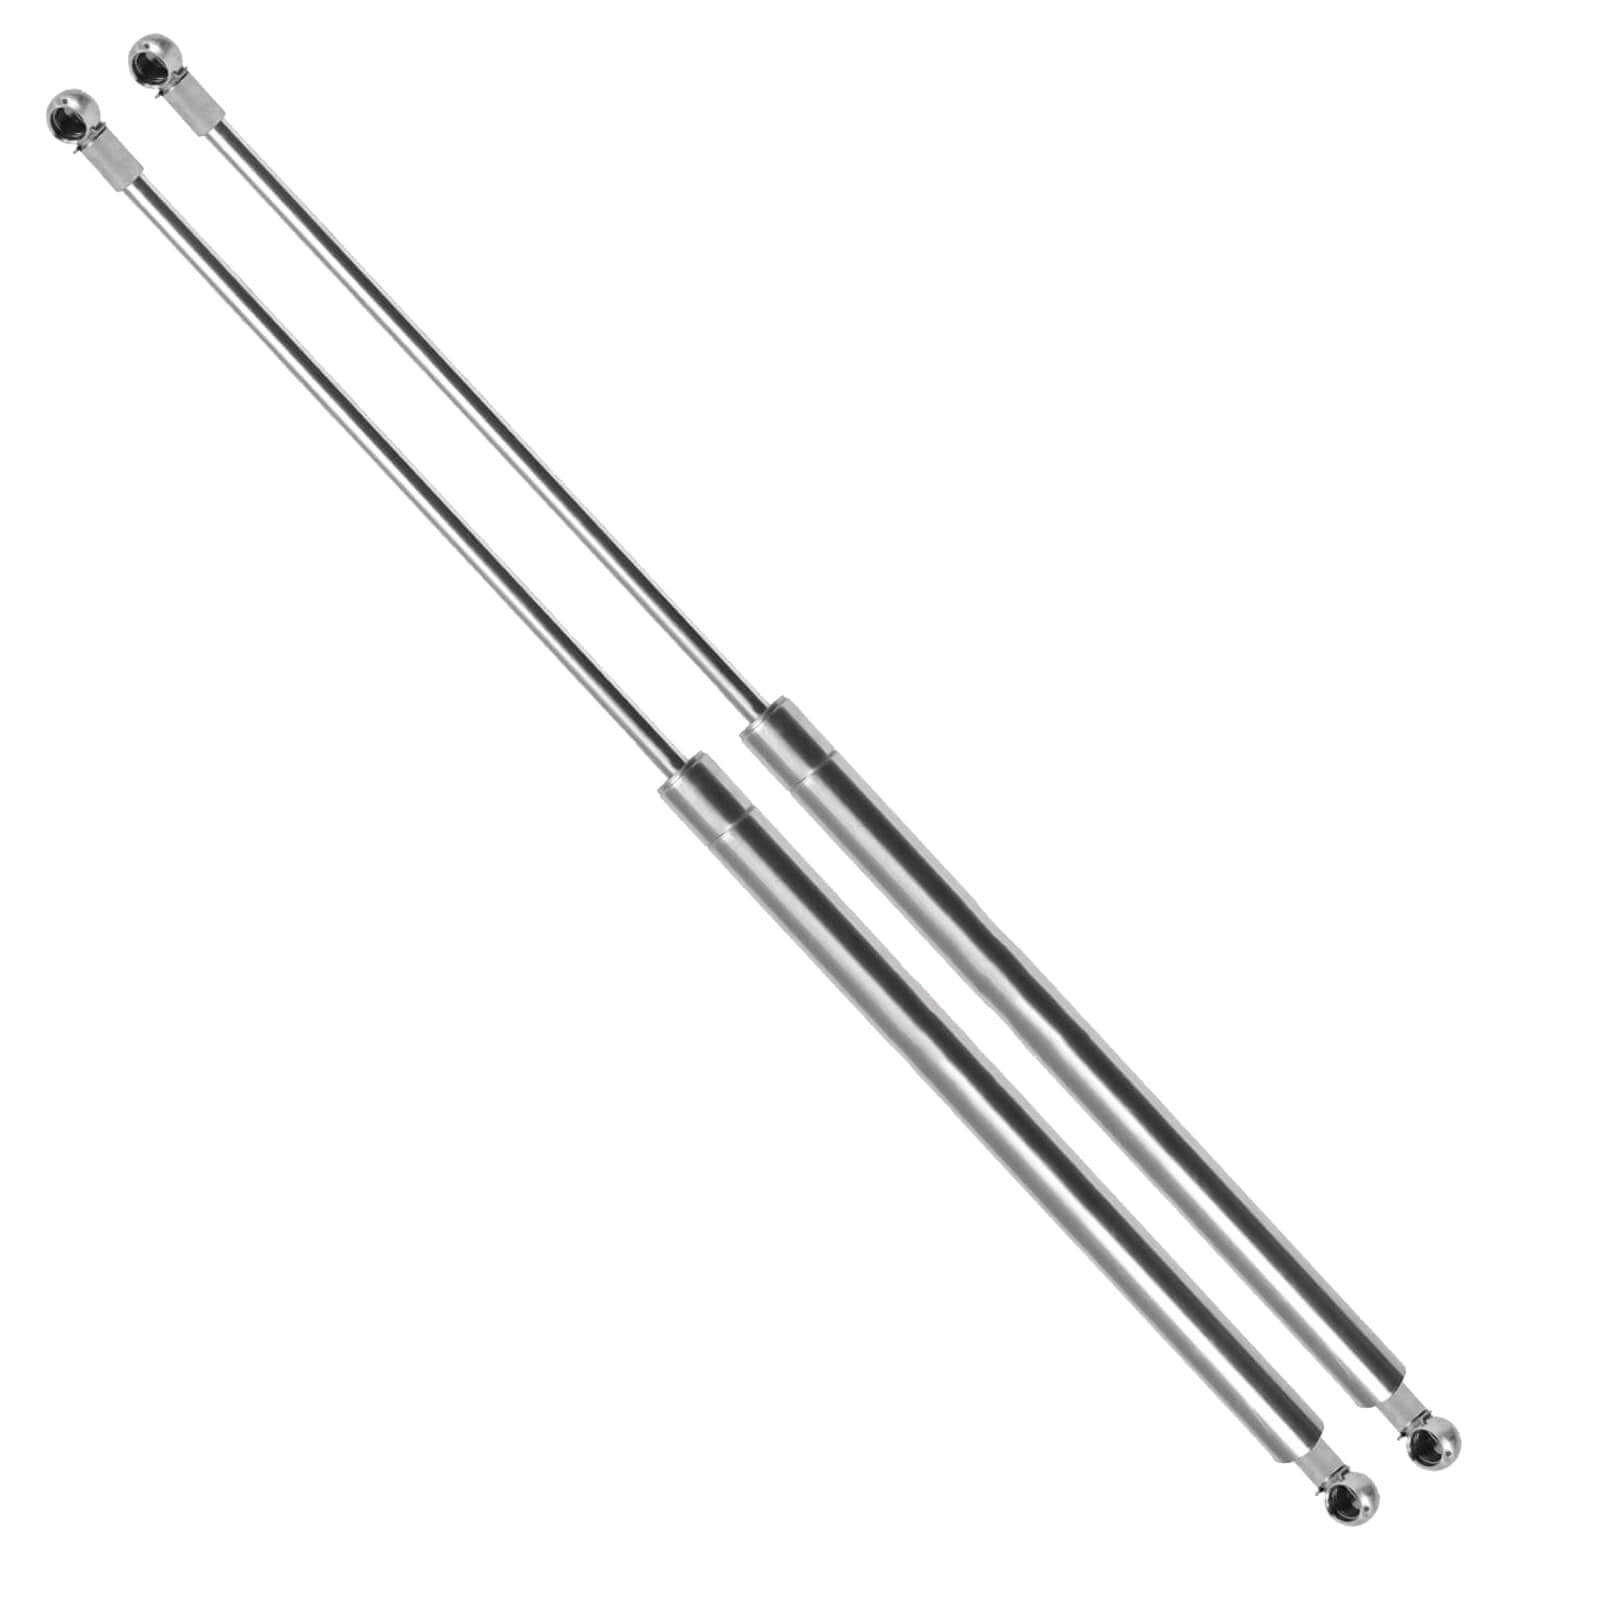 4672 Extended Length 10 Inches Compressed Length 6.75 Inches Froce 51 Lbs Universal Lift Supports Struts Shocks Dampers Springs Props 2 Dayincar Qty 